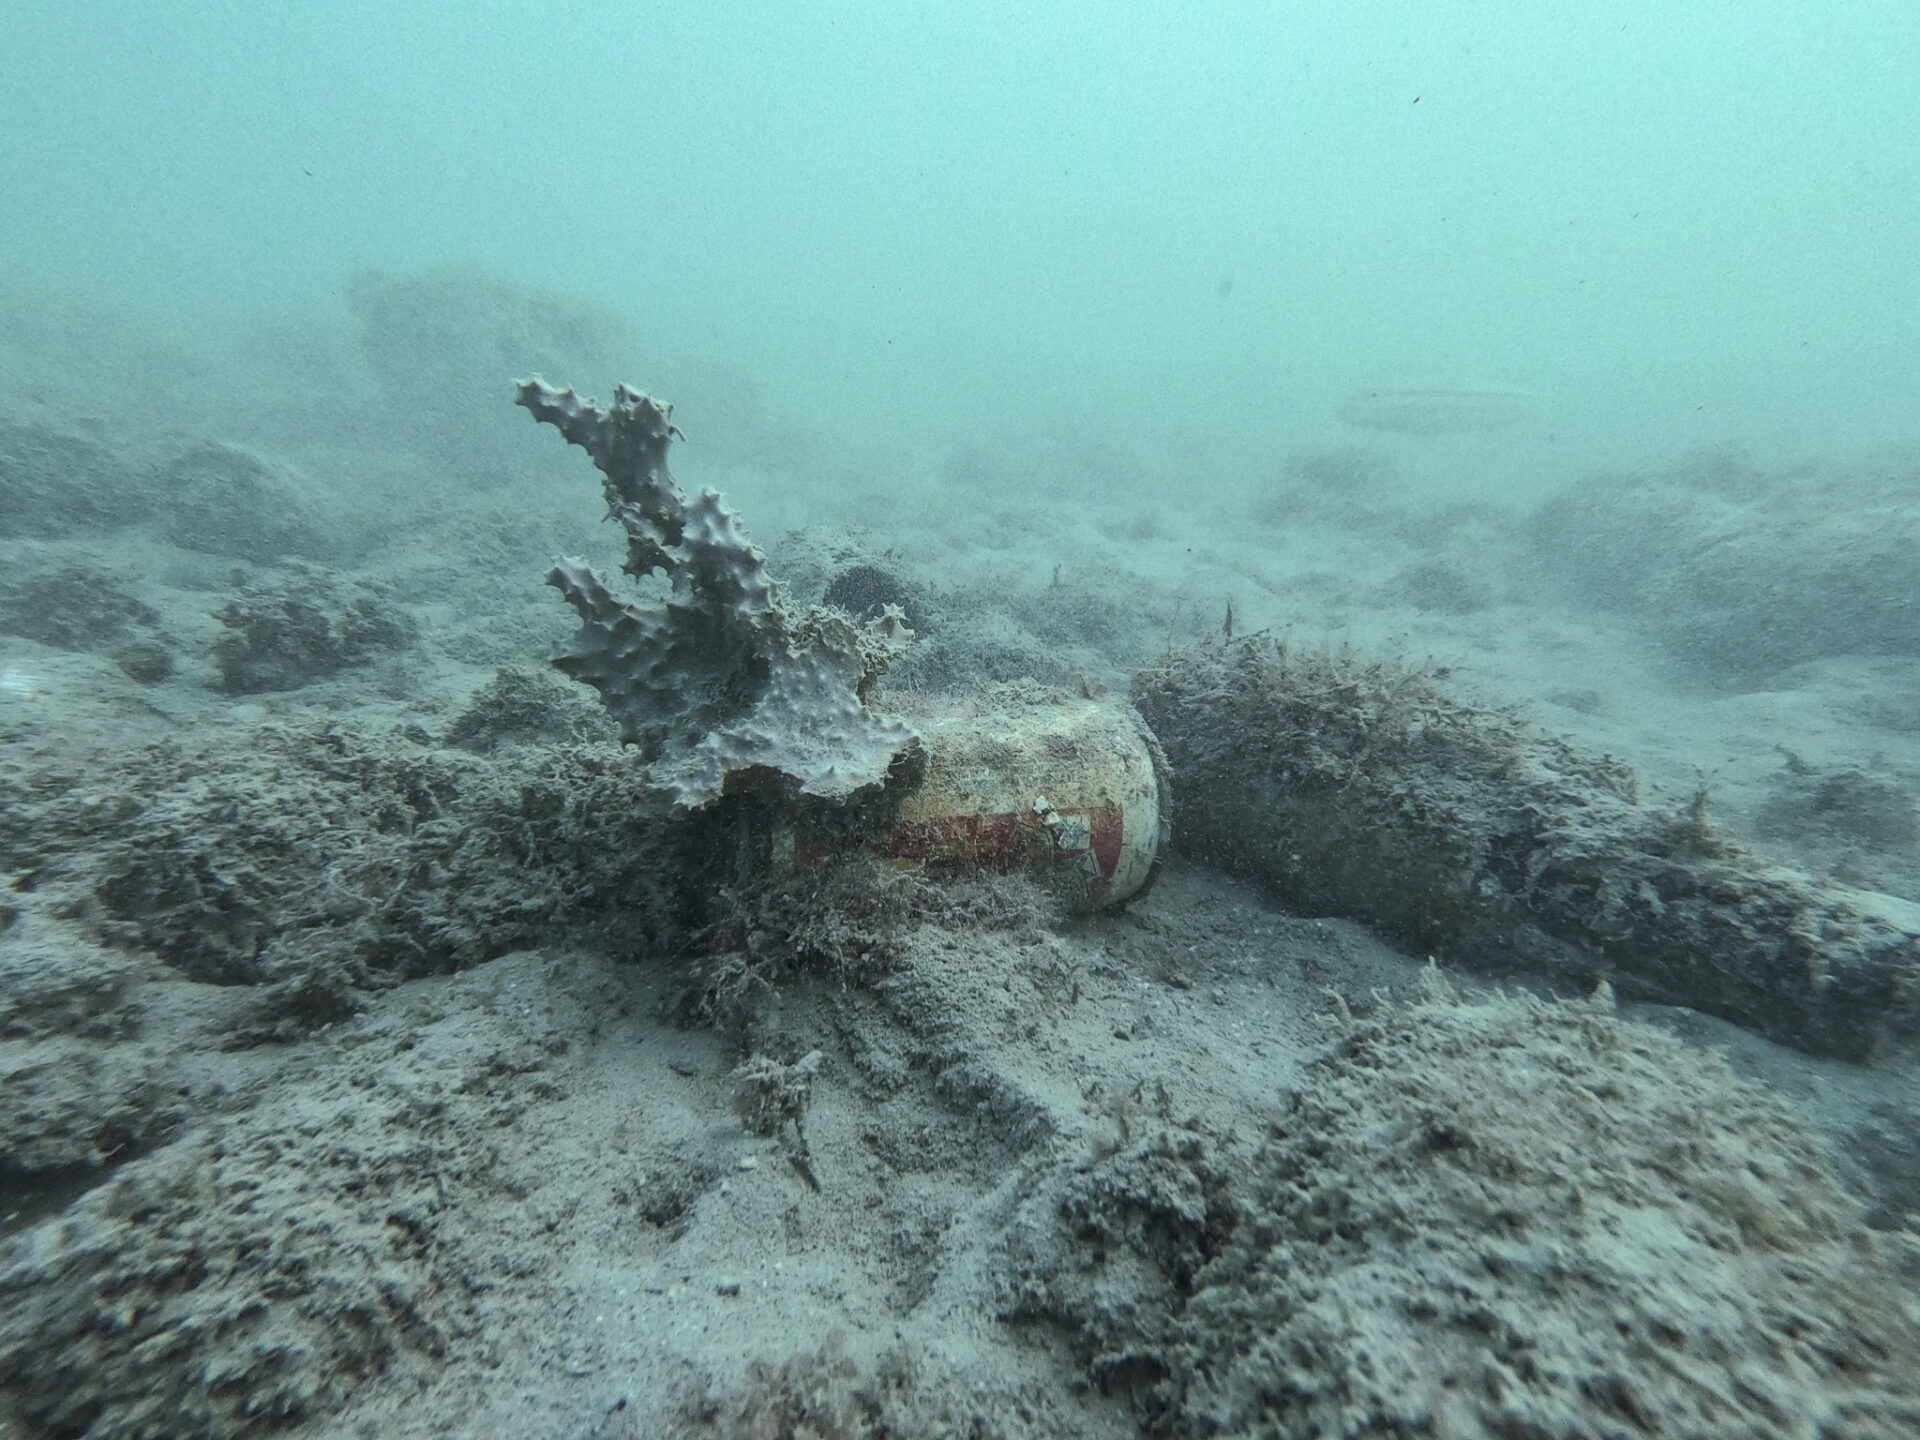 Marine debris found at the popular dive site on Oahu, Point Panic